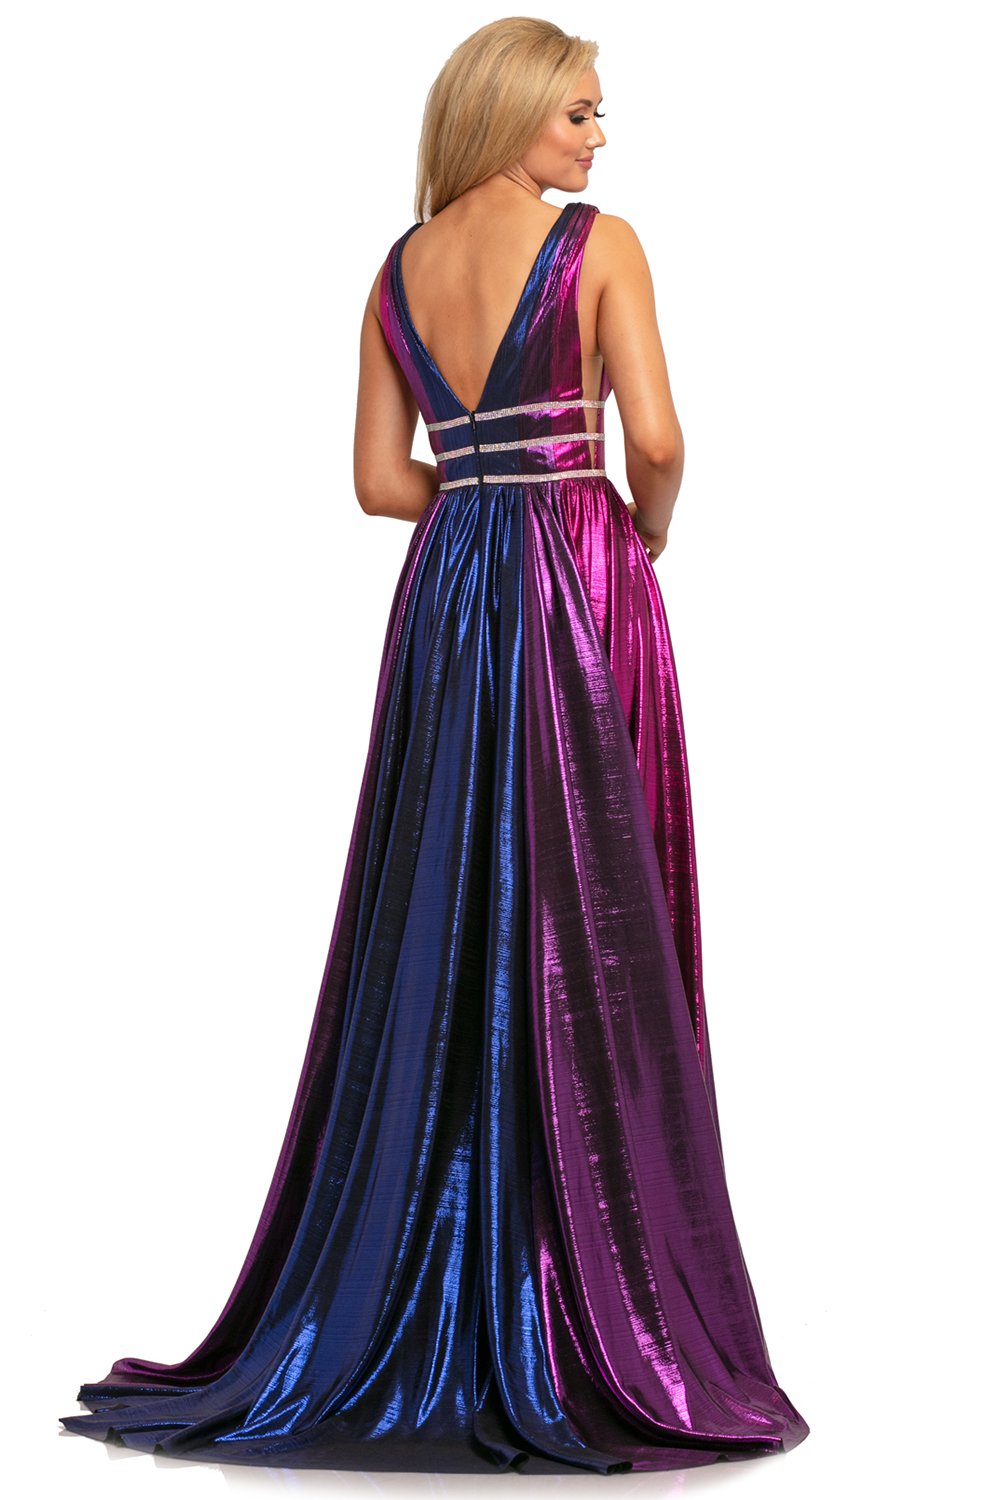 Johnathan Kayne - 2008 Plunging Multi-Colored Metallic A-Line Gown In Pink and Multi-Color